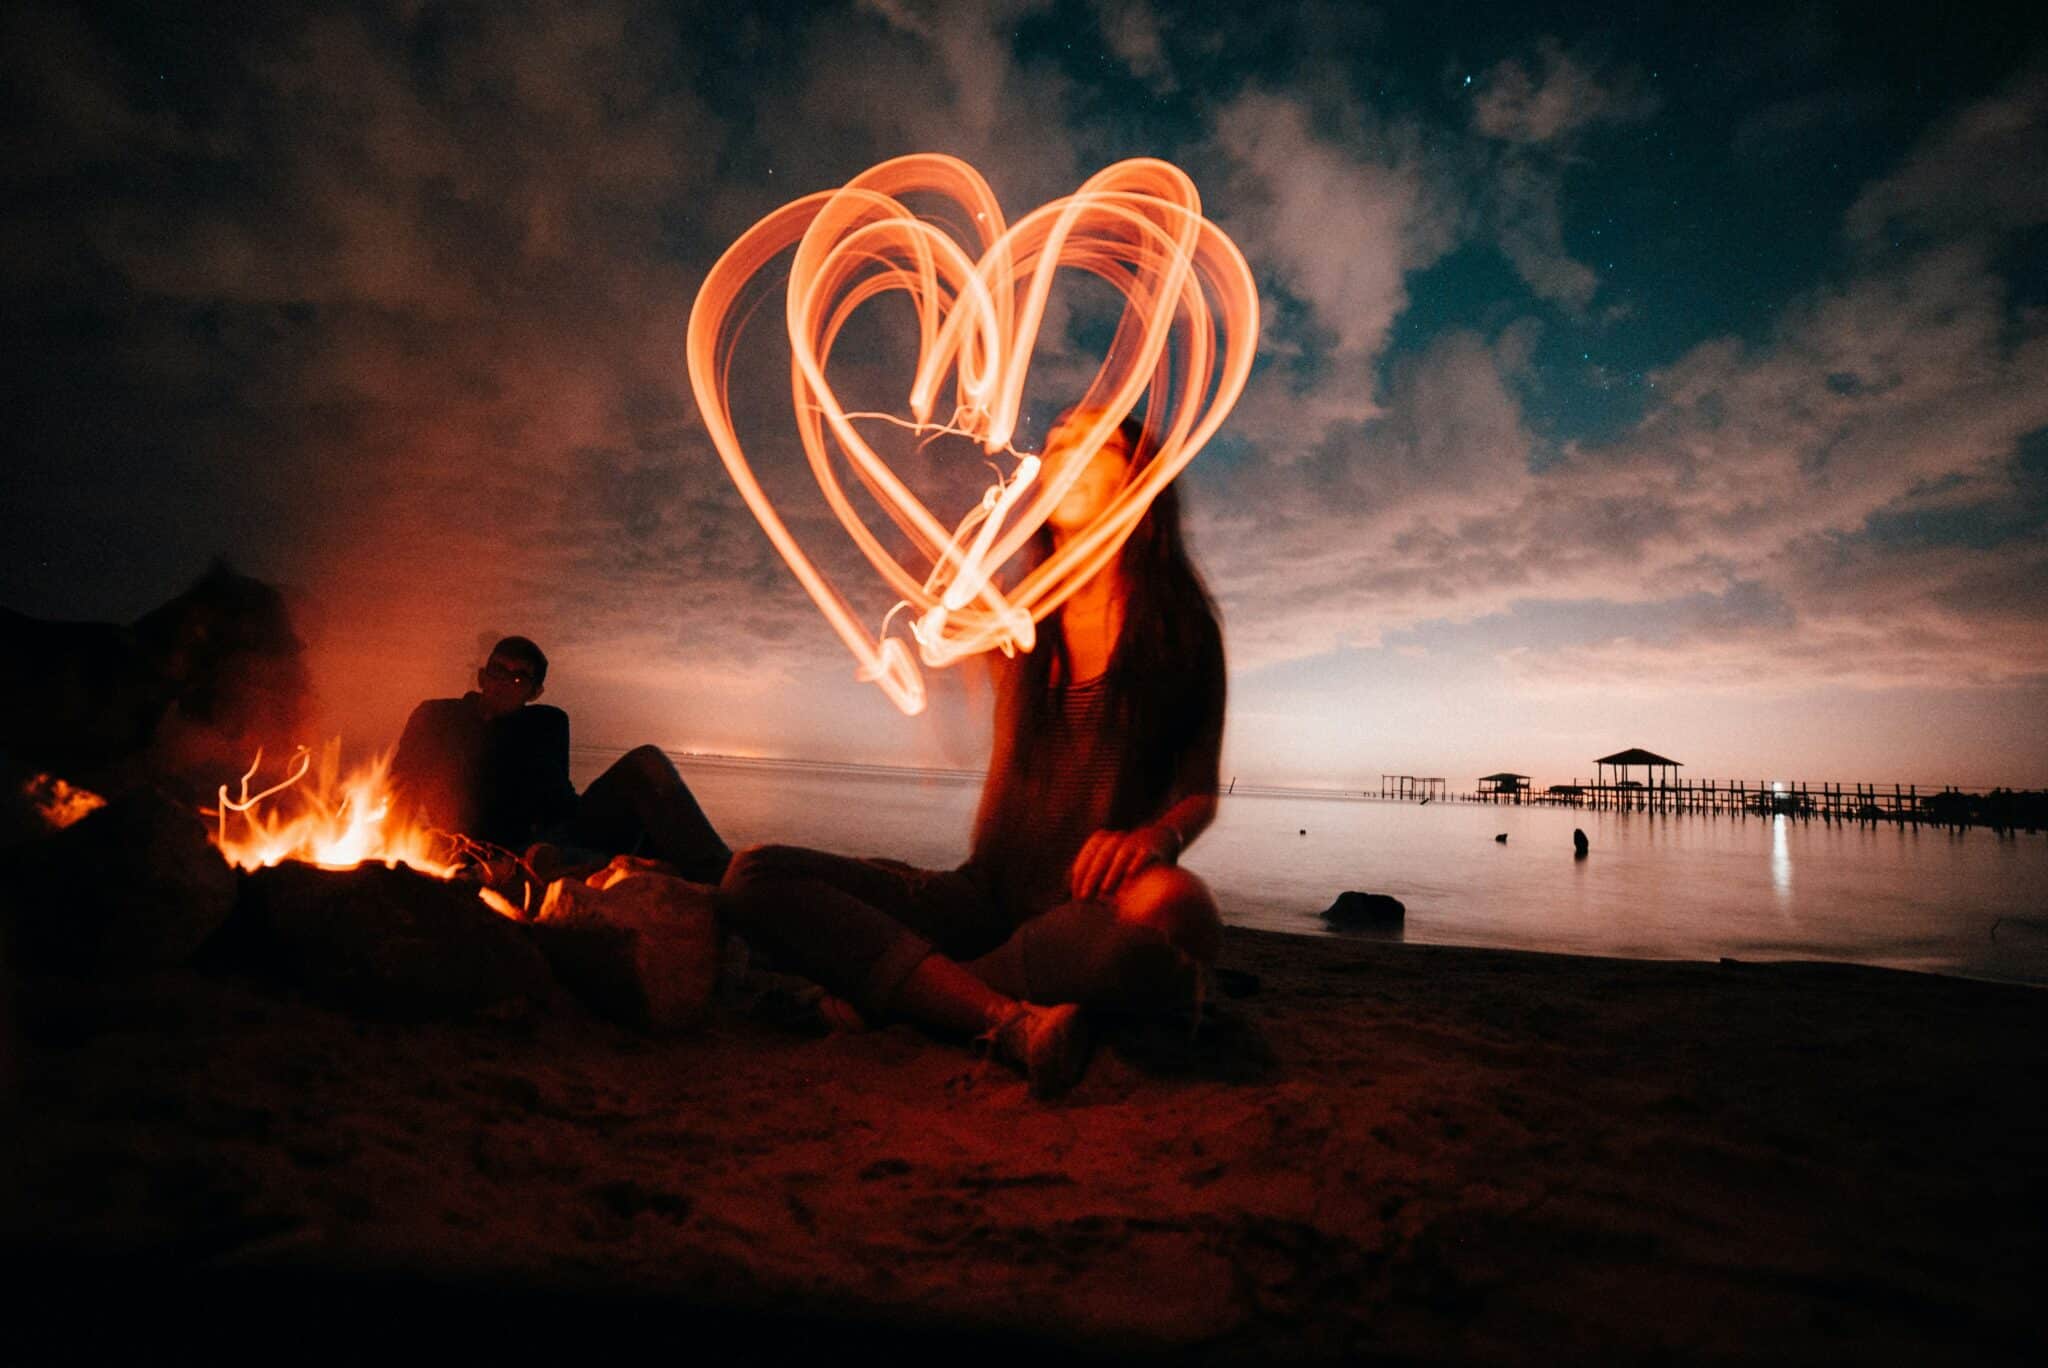 Woman making a heart out of light | Photo by Rhand McCoy on Unsplash